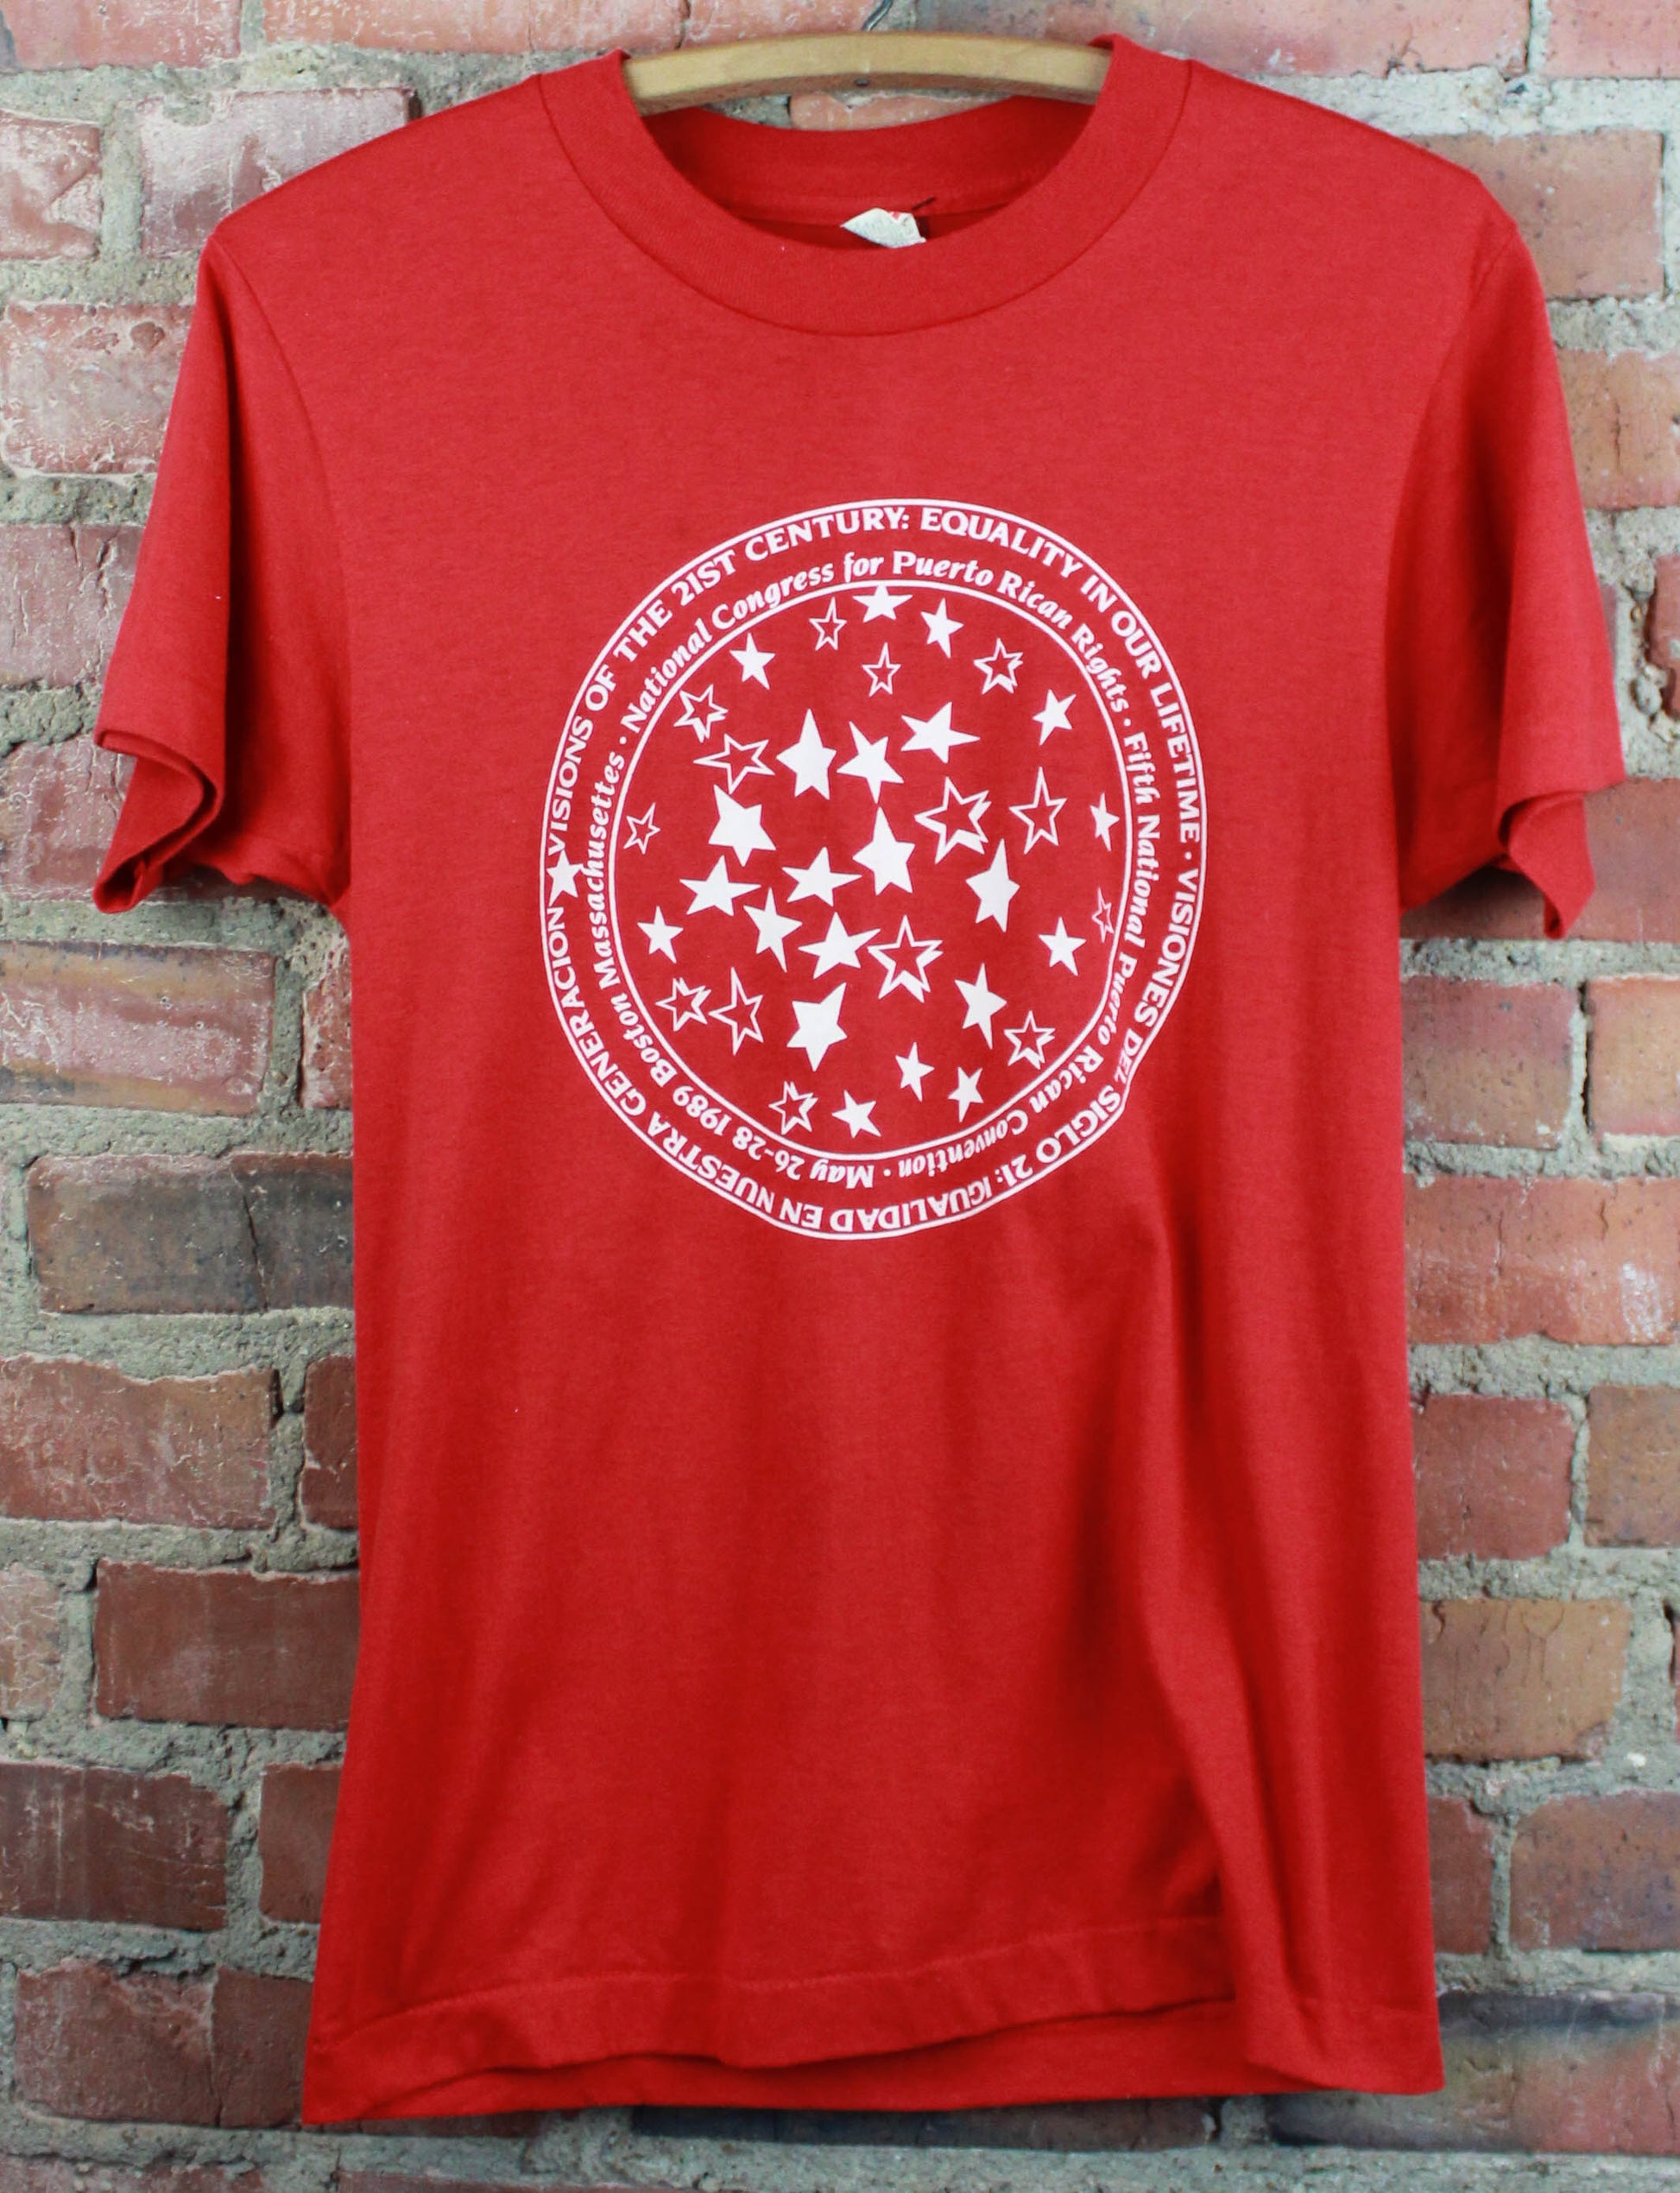 Vintage 1989 Puerto Rican Rights Conference Graphic T Shirt Red Unisex Small